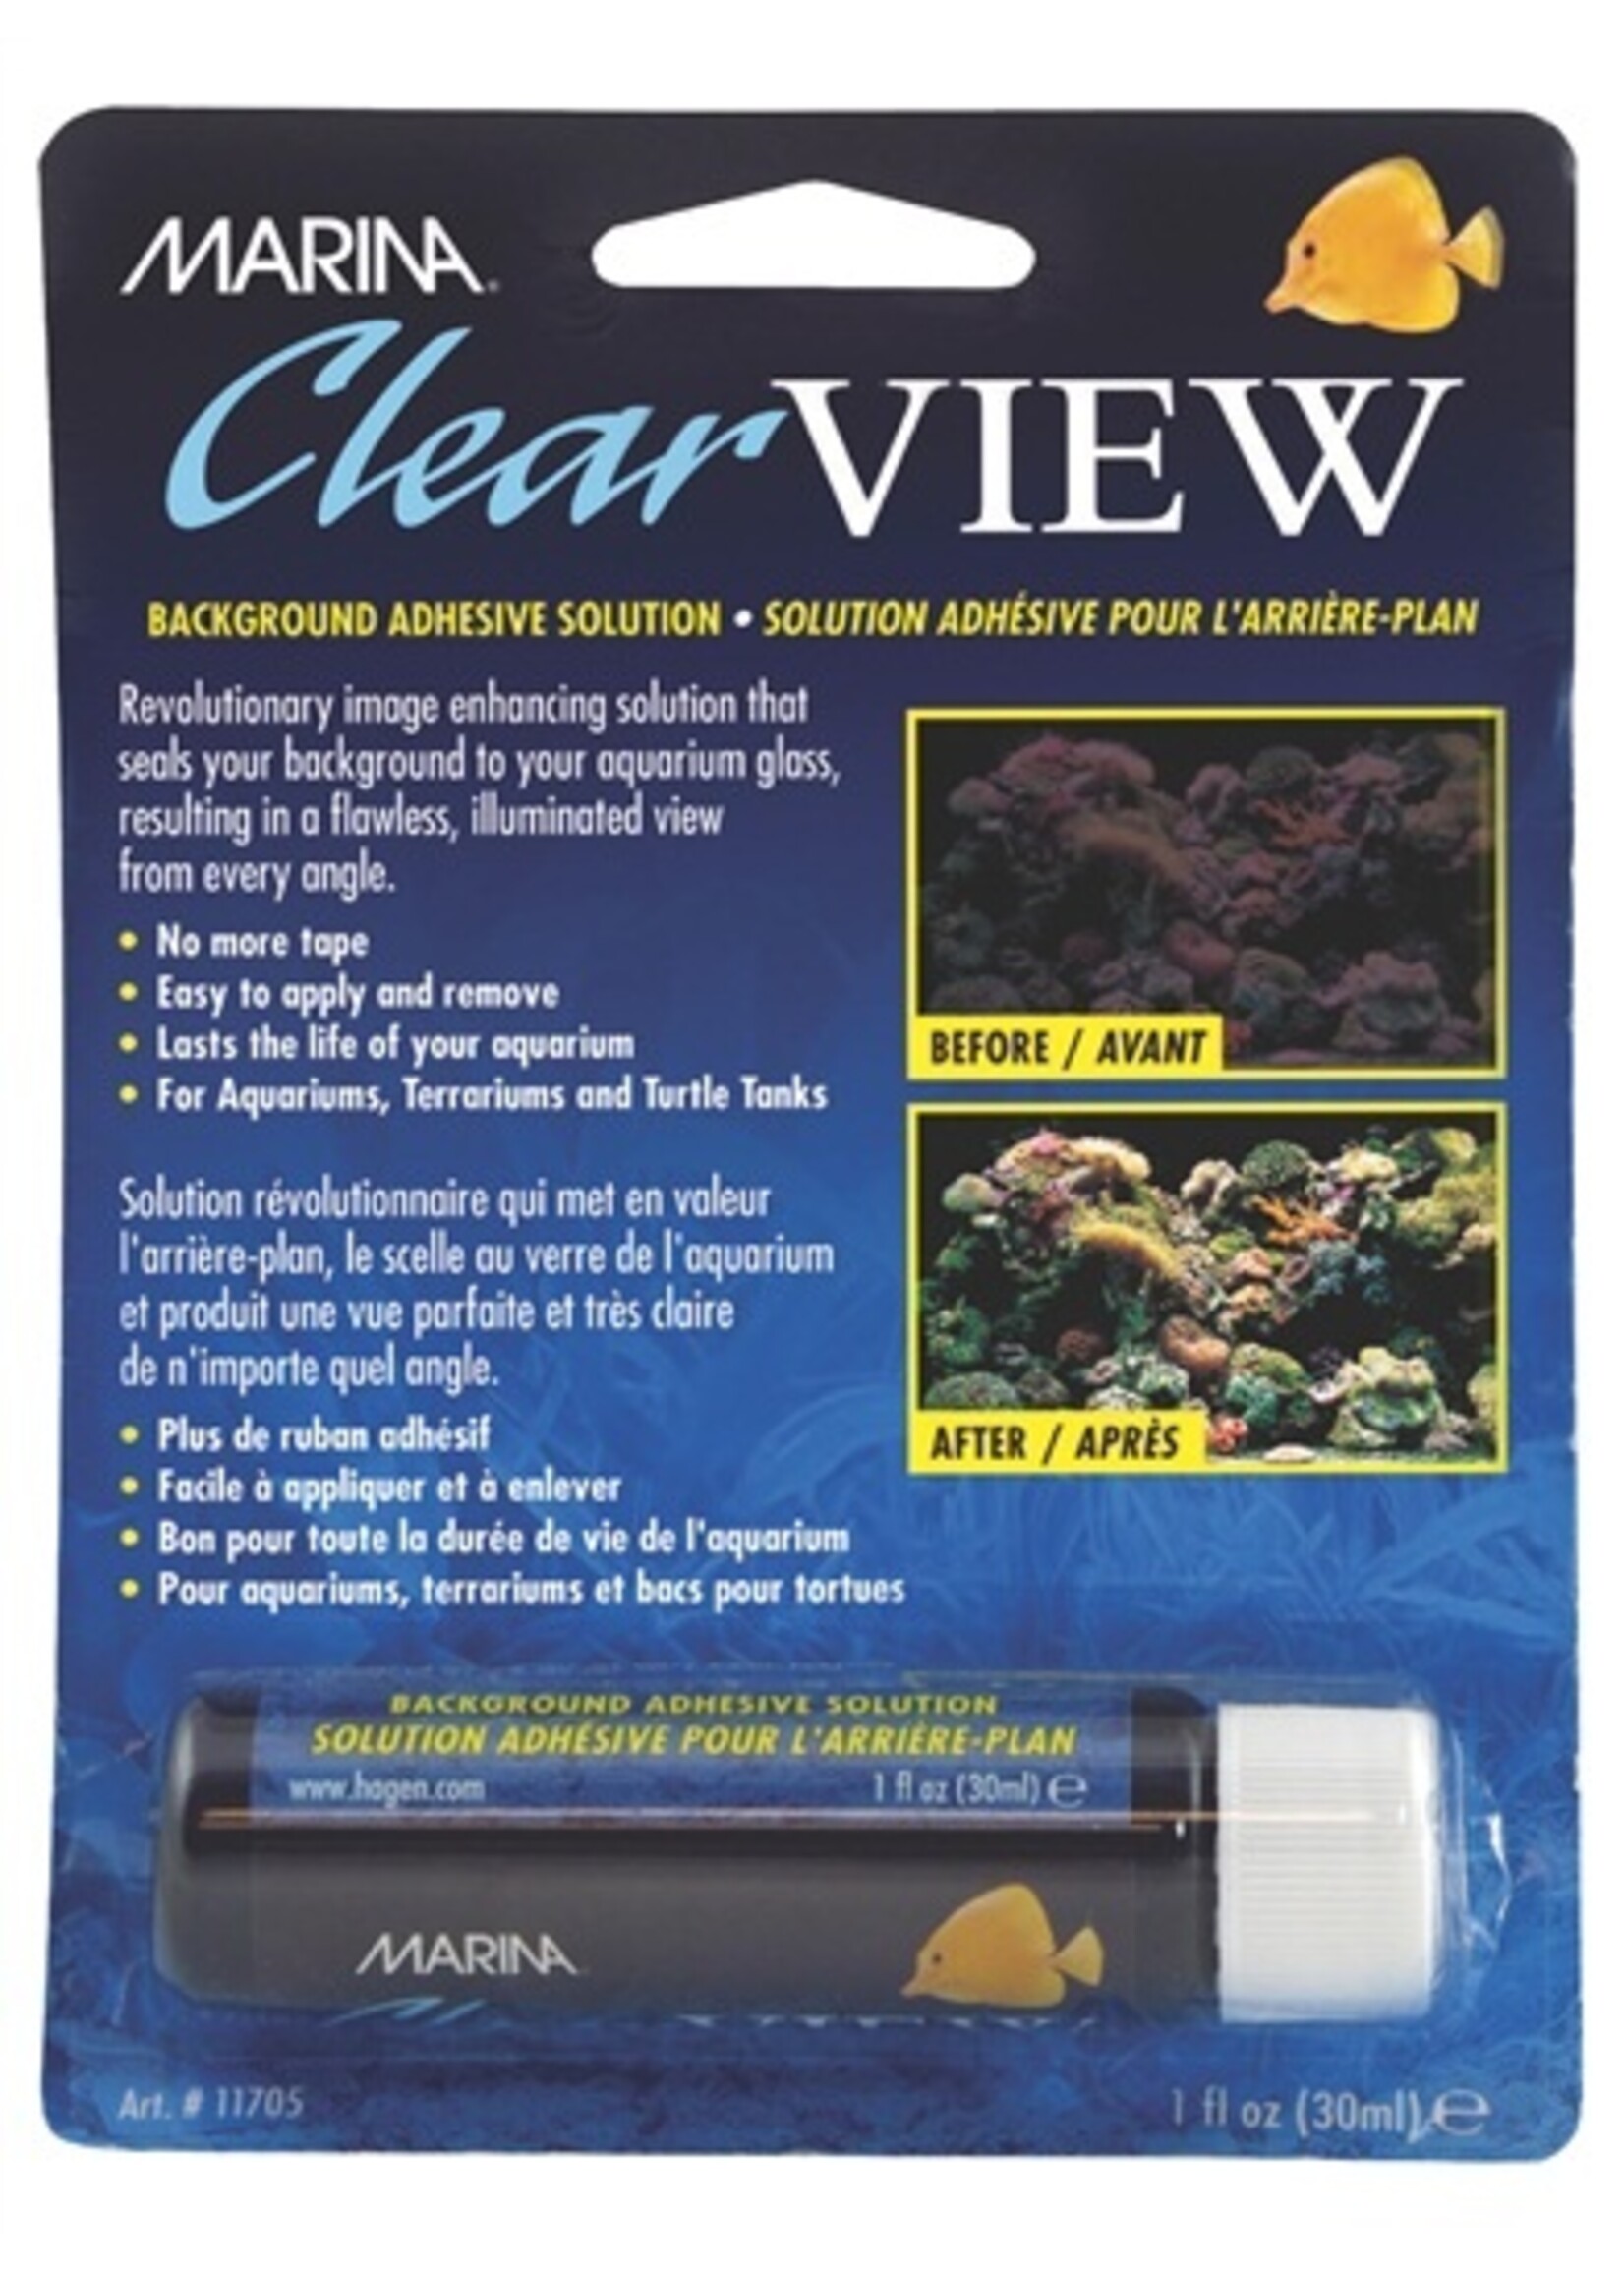 Marina Marina ClearView Background Adhesive Solution 1 fl oz